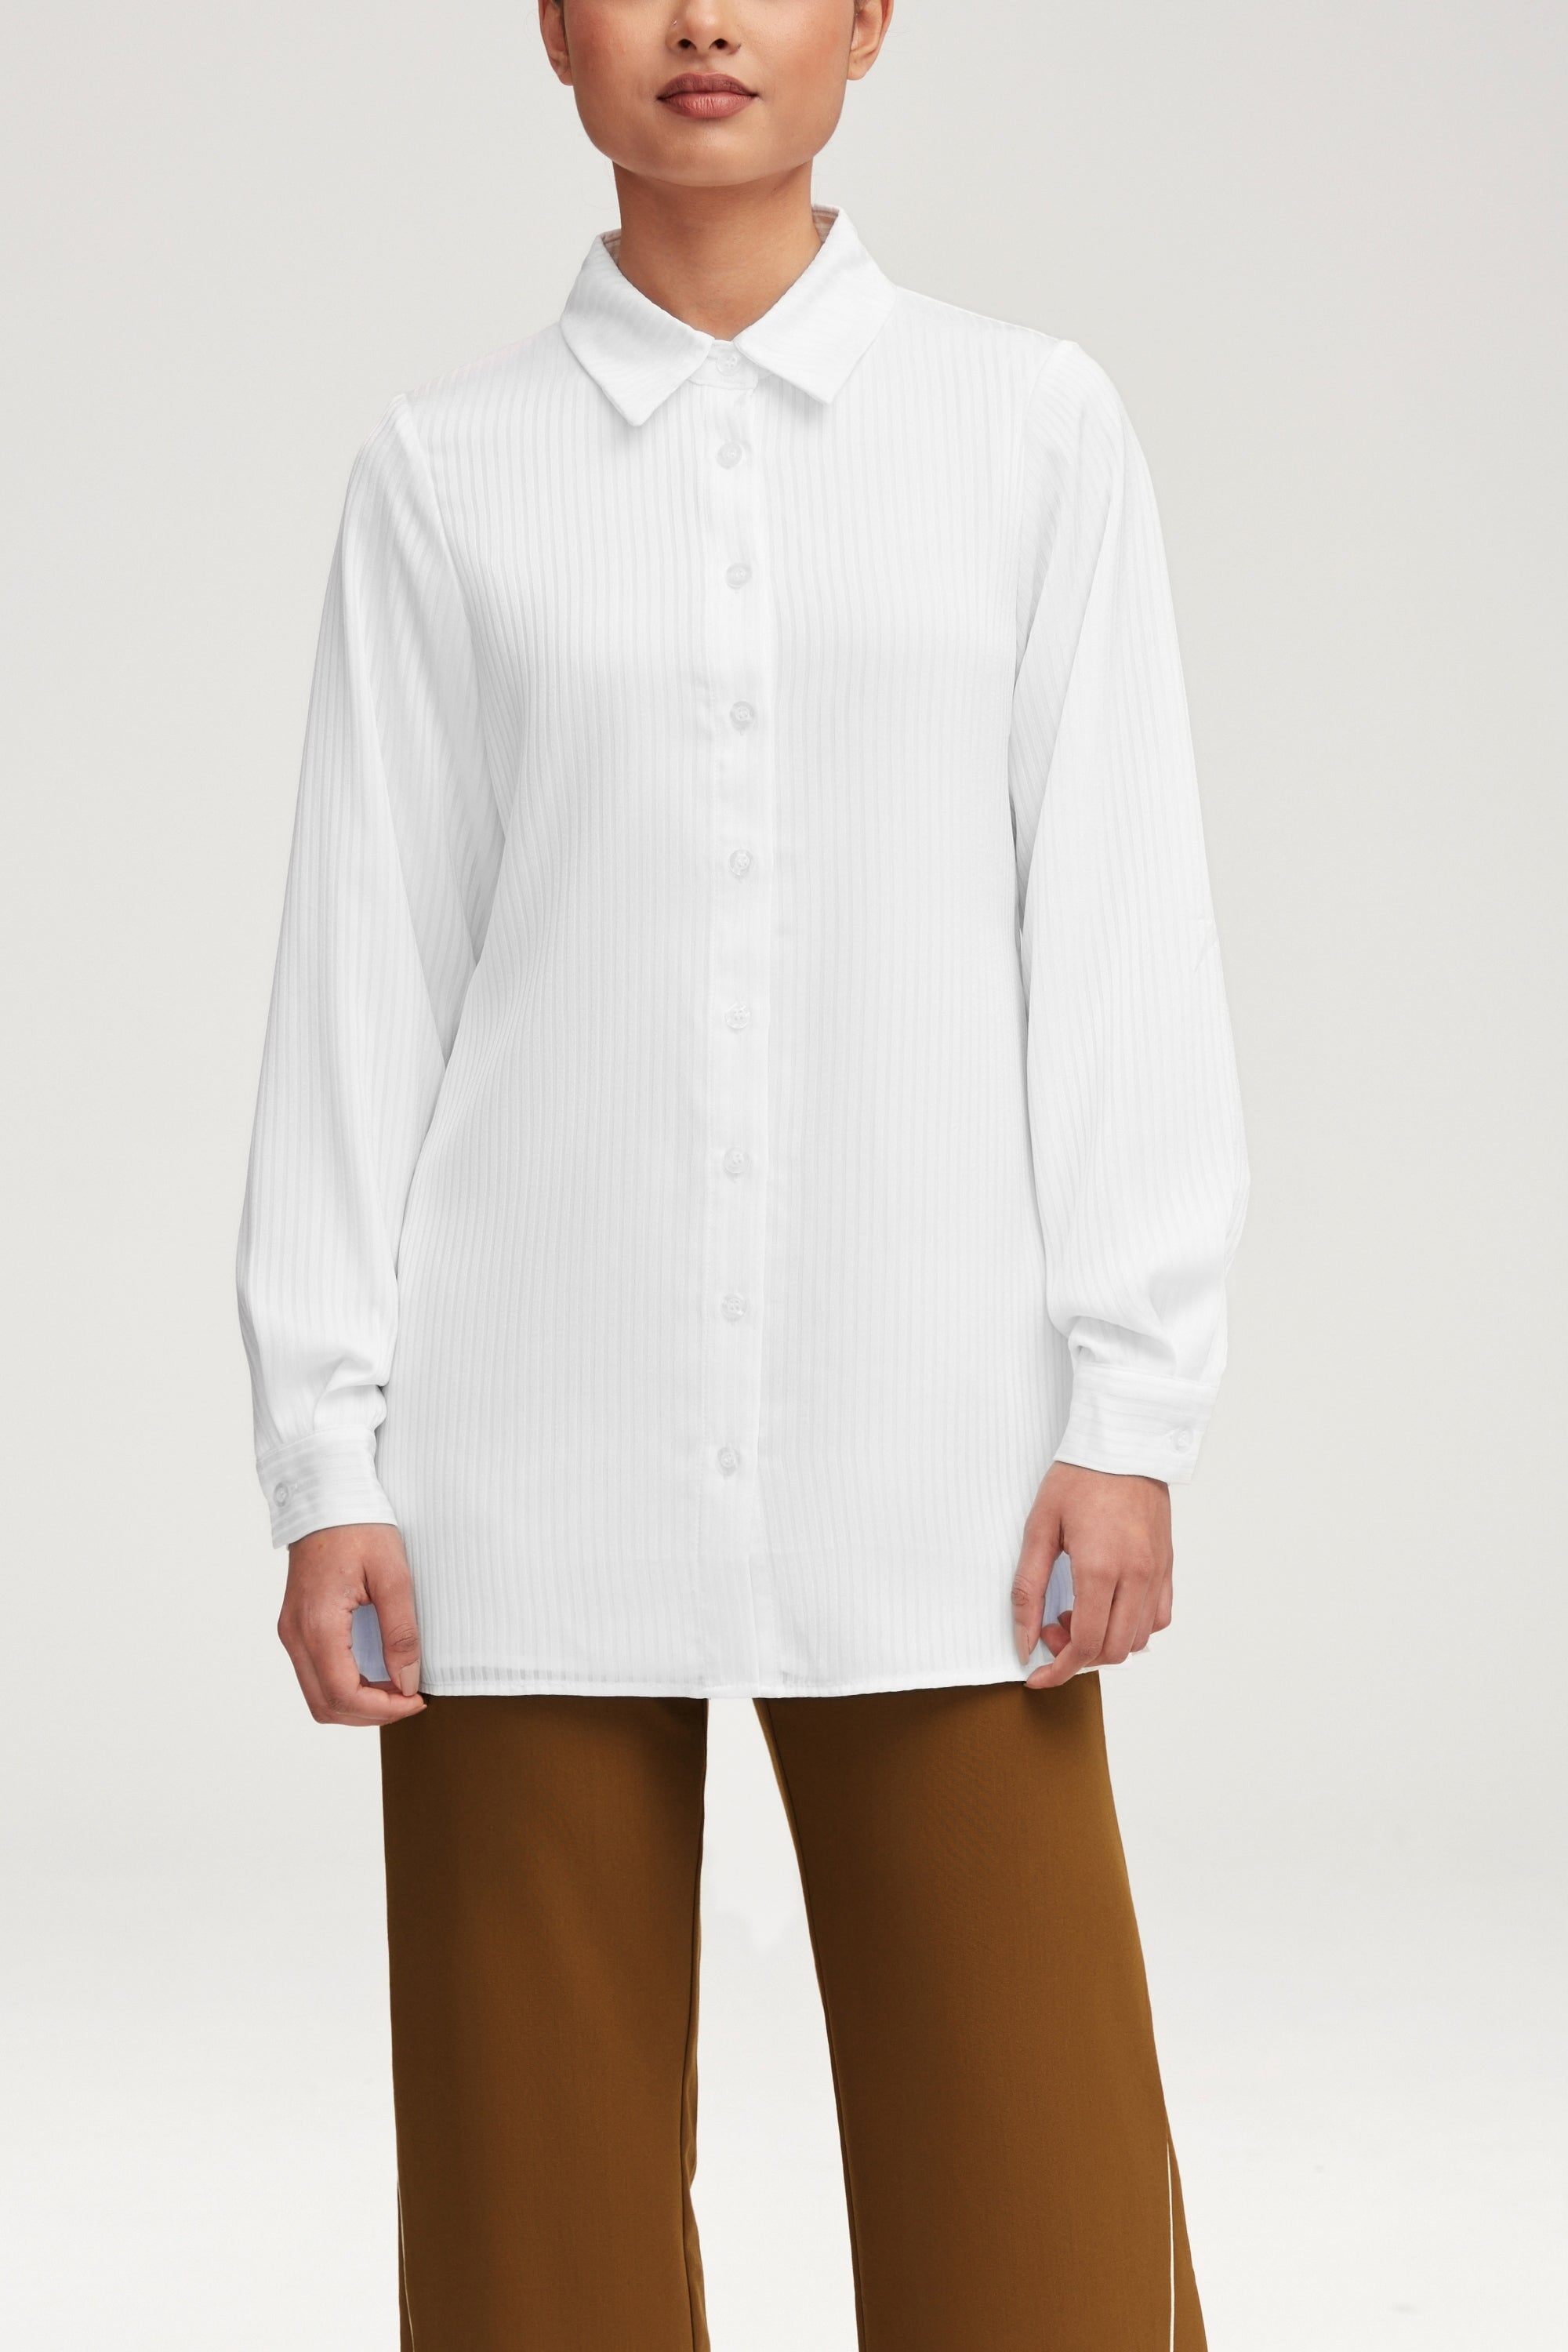 Jaserah Button Down Top - White Clothing Veiled 